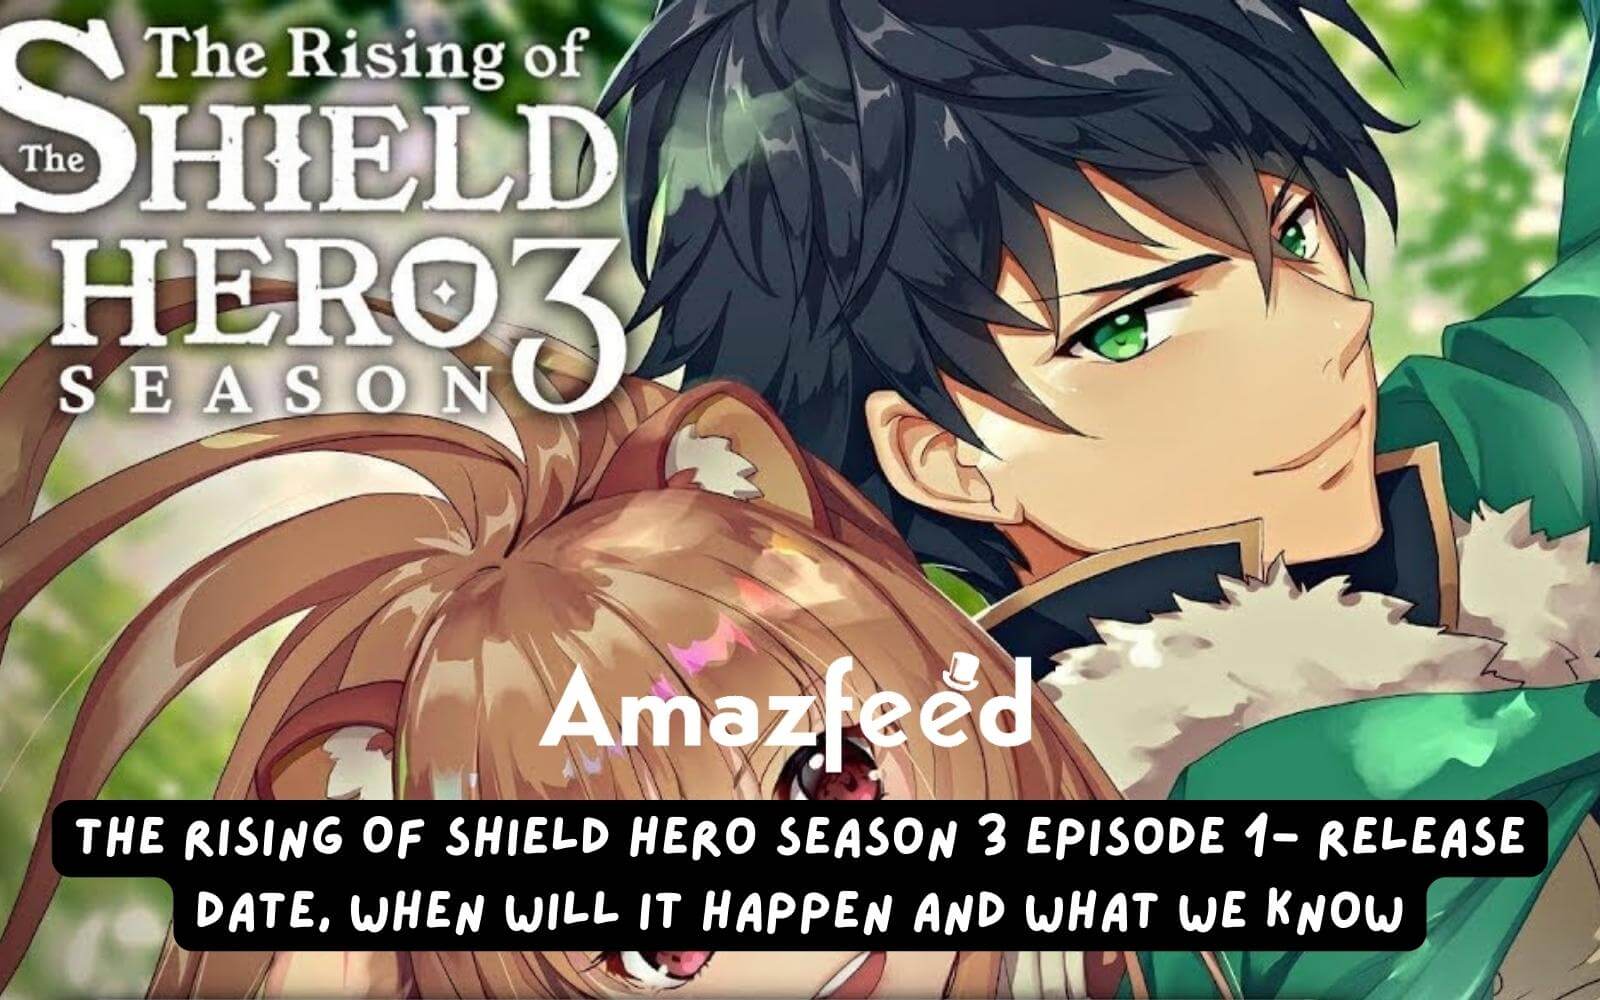 The Rising Of Shield Hero Season 3 Episode 1- Release date, When Will it Happen and What We Know